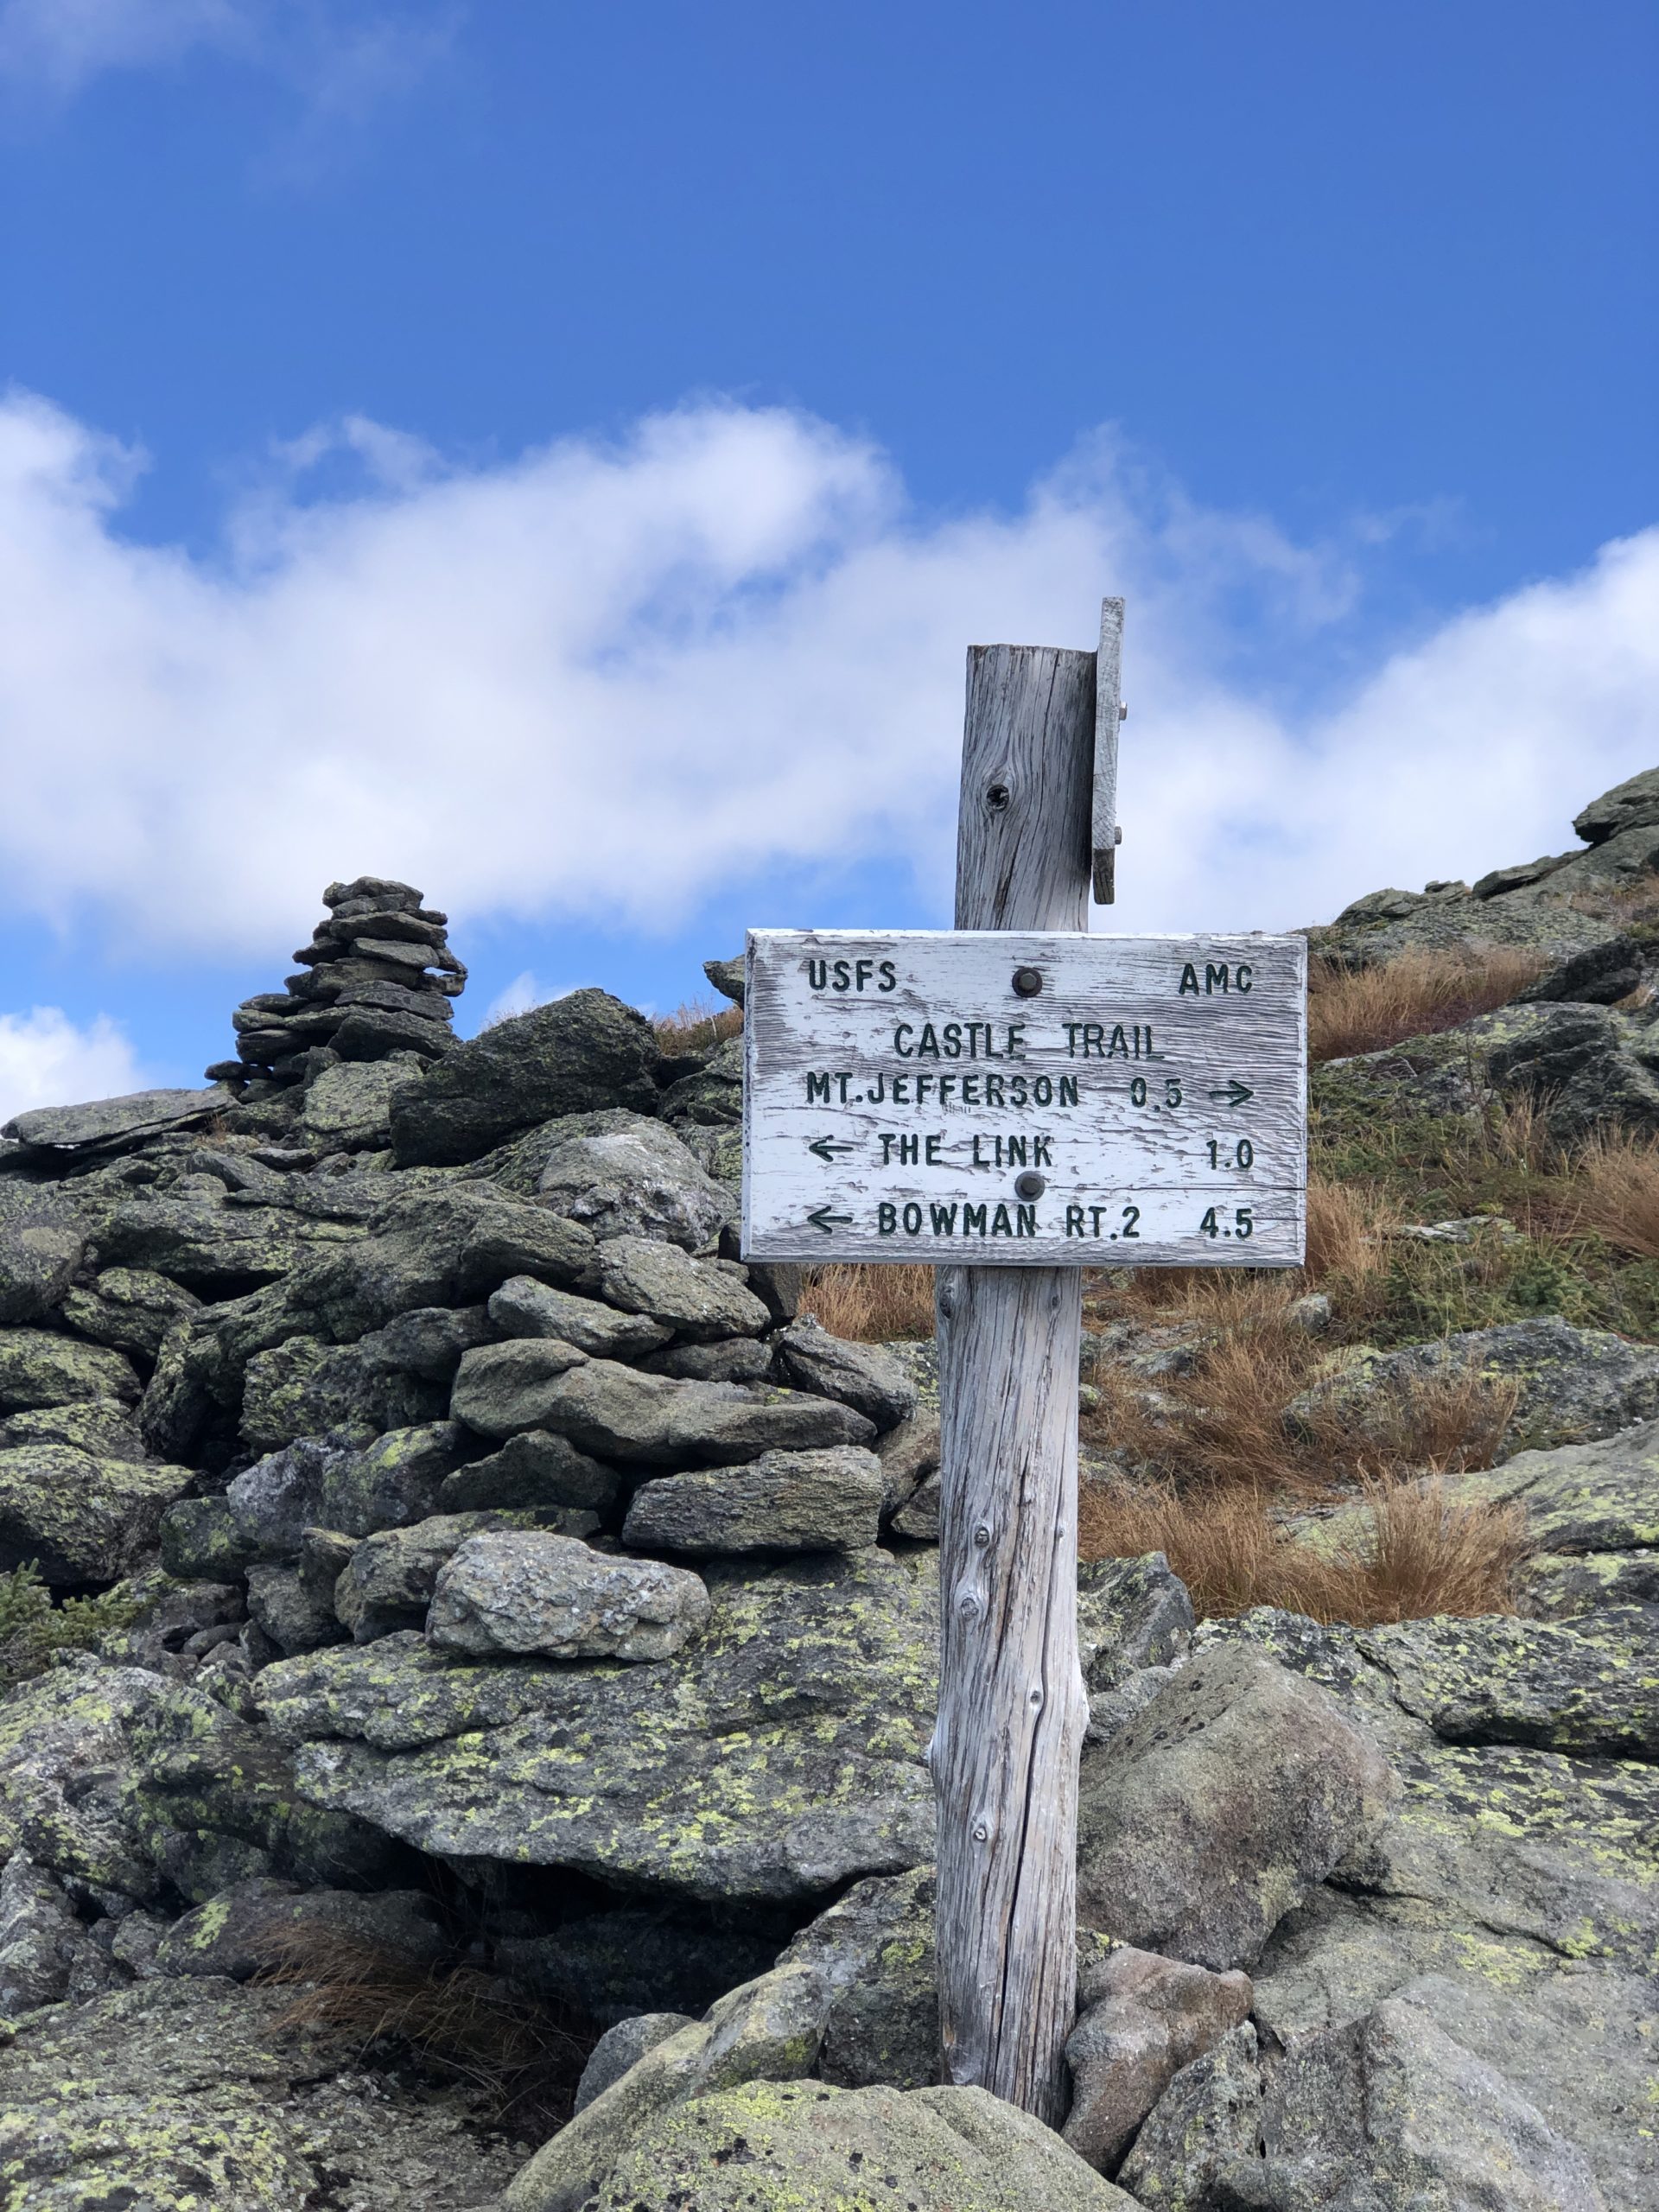 A trail sign seen while hiking Mt Jefferson in the White Mountains, New Hampshire